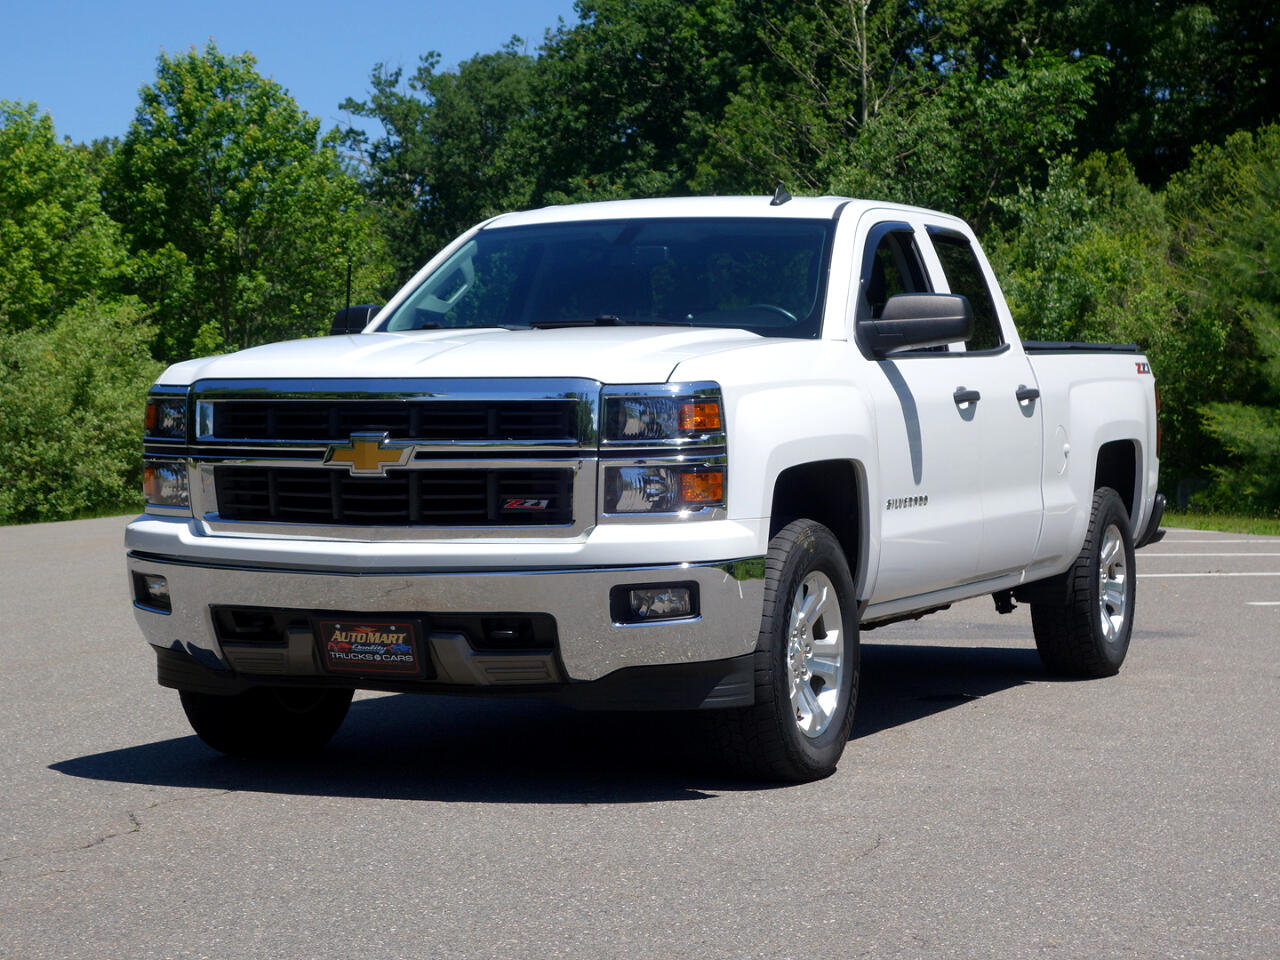 Used 14 Chevrolet Silverado 1500 4wd Double Cab 143 5 Lt W 2lt For Sale In Derry Nh Auto Mart Quality Trucks Cars